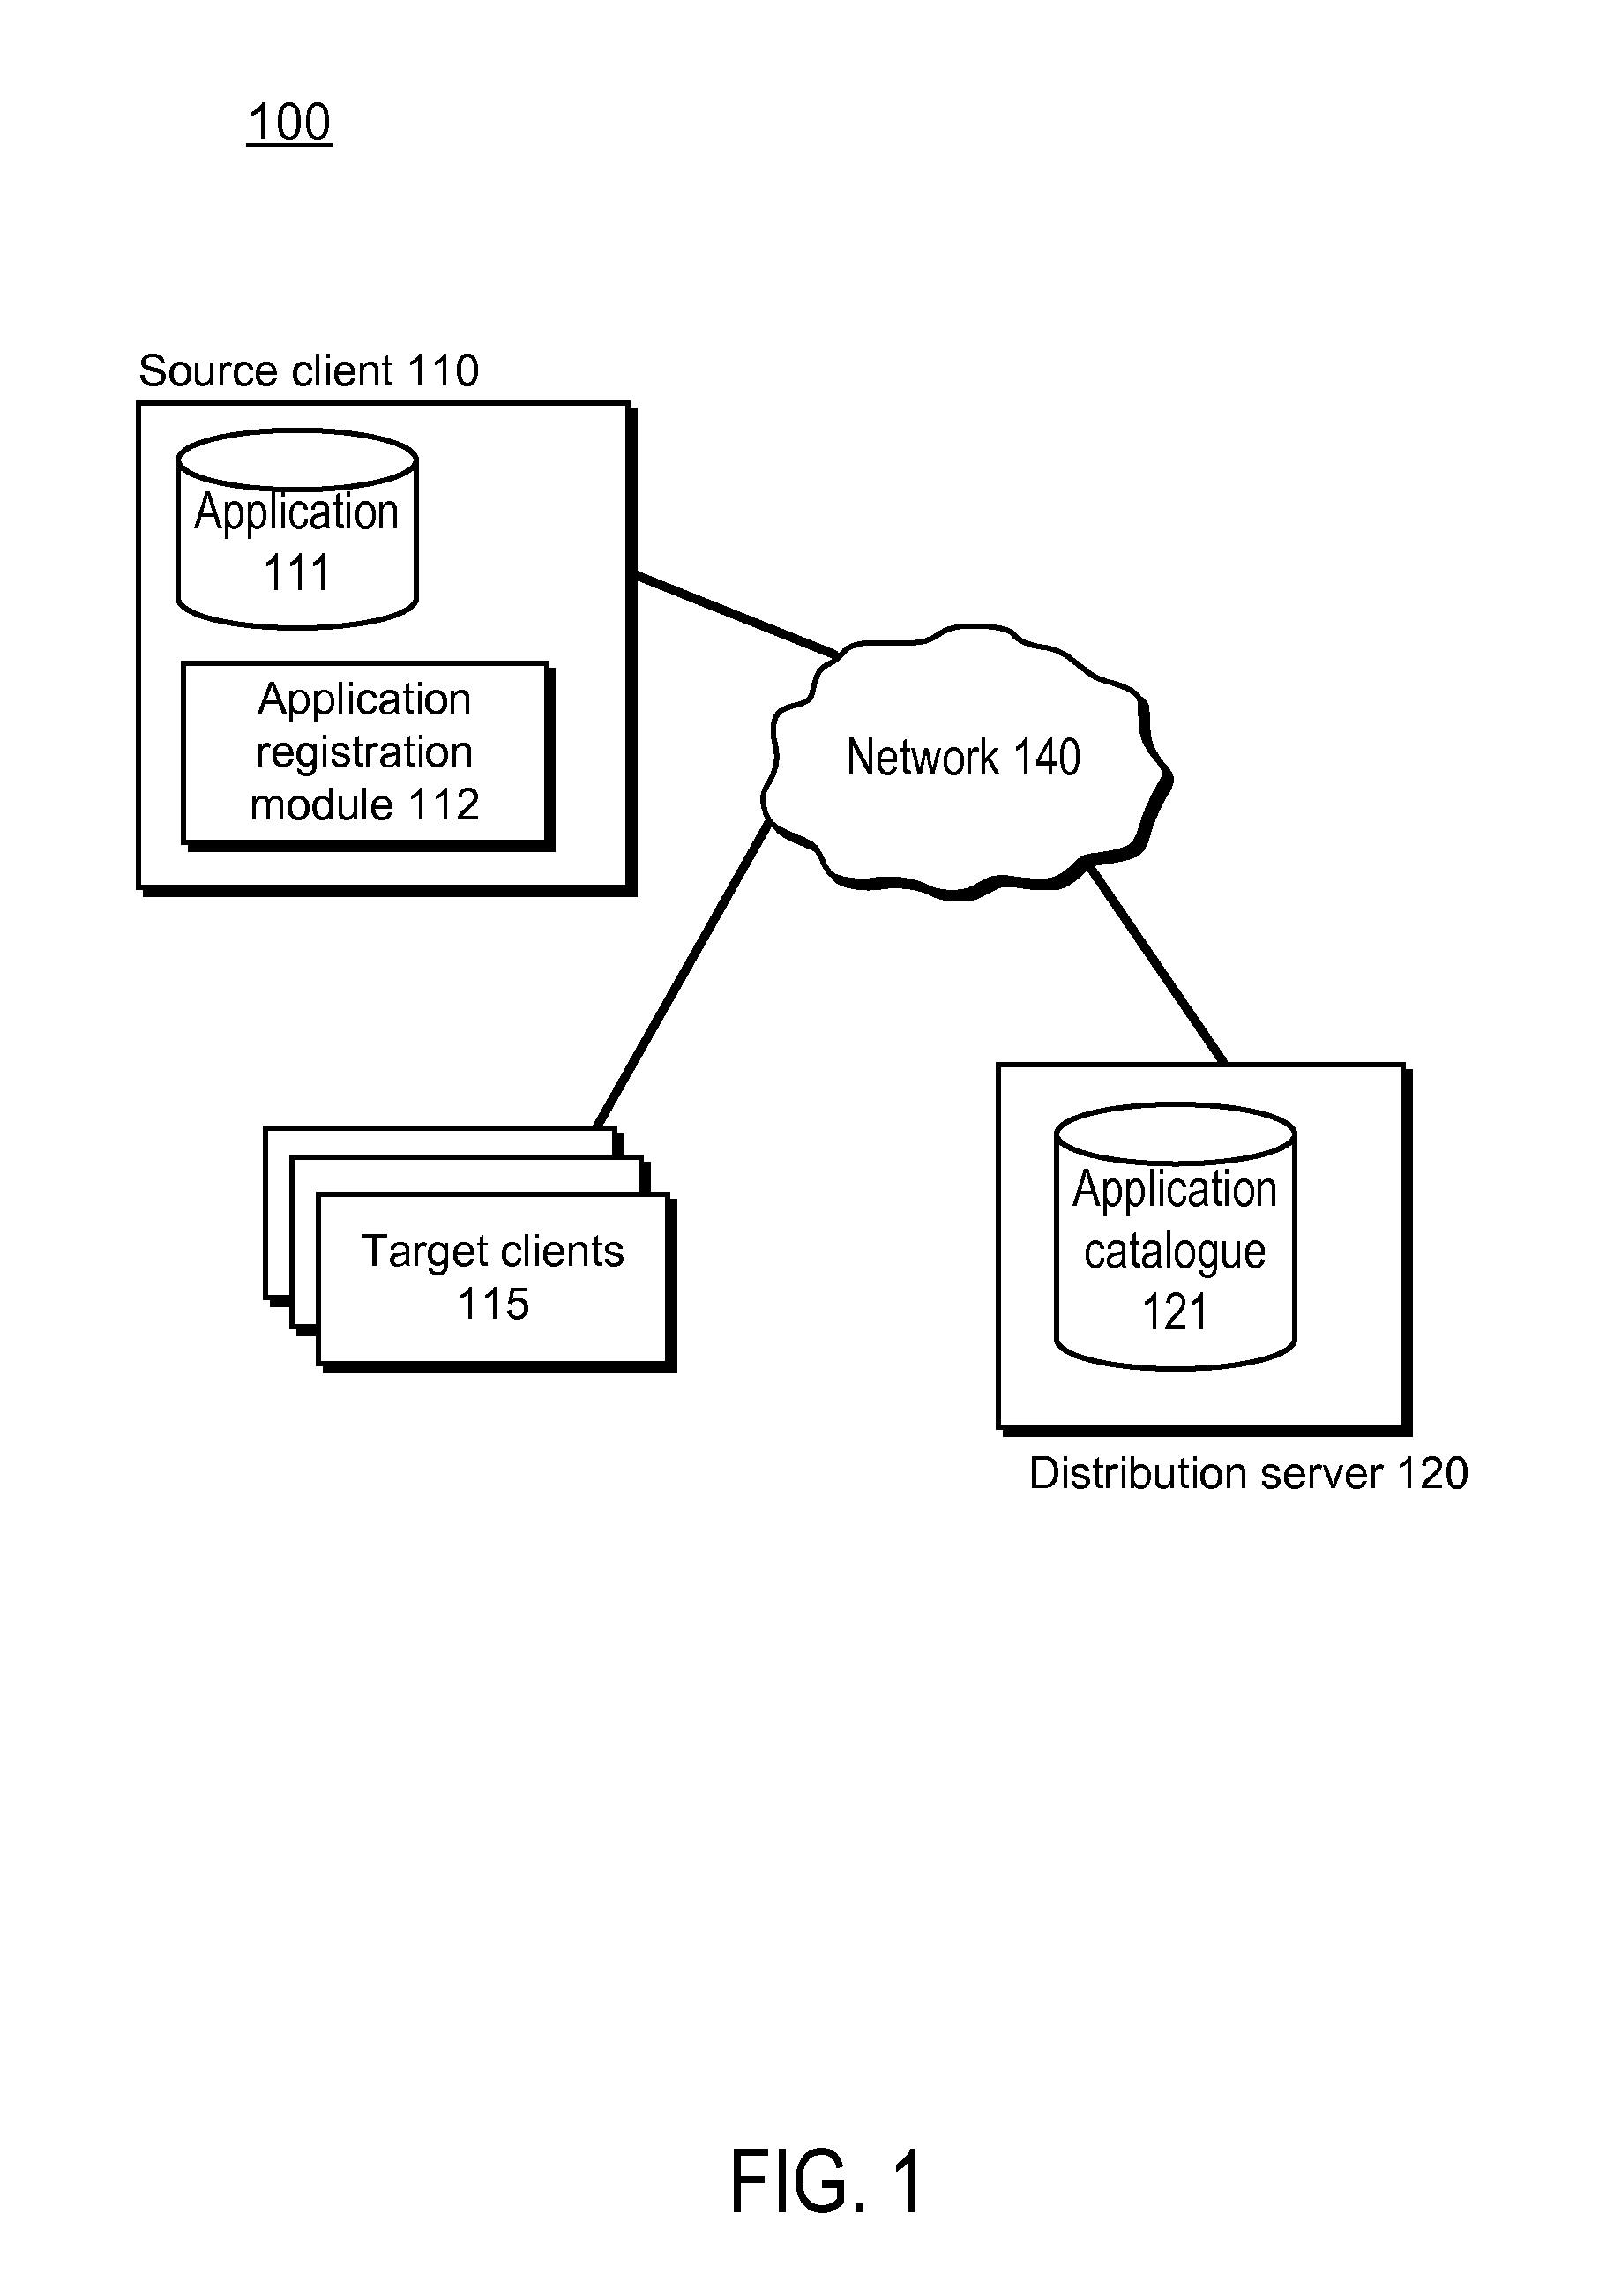 Automated generation of application data for application distribution